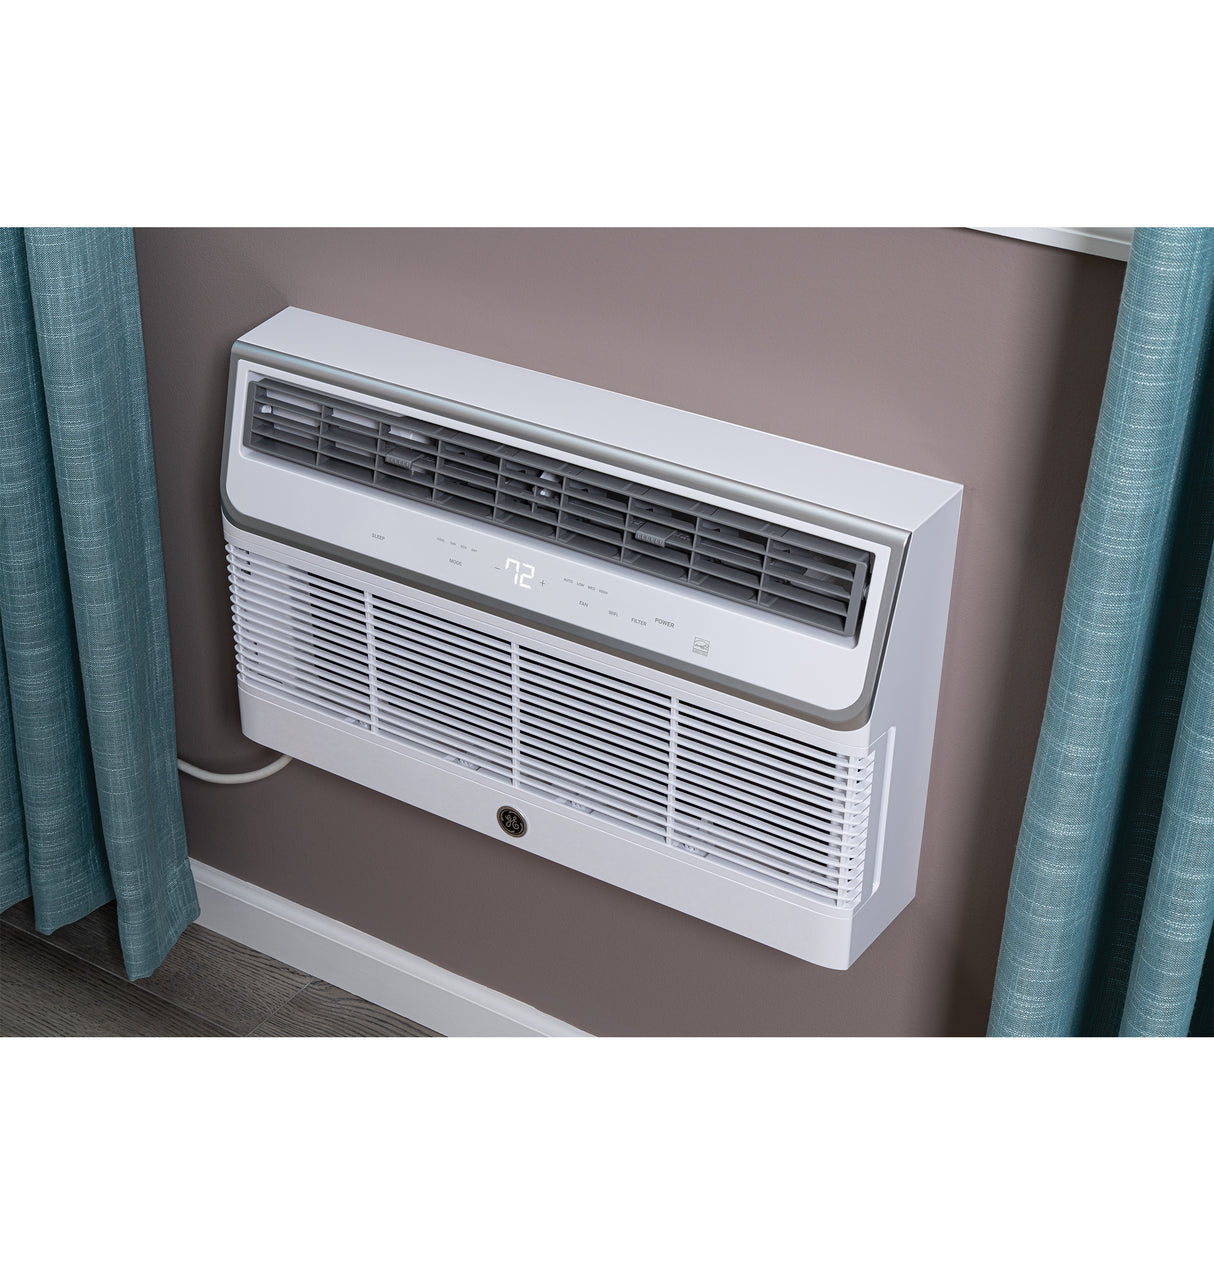 GE(R) ENERGY STAR(R) 115 Volt Built-In Cool-Only Room Air Conditioner - (AJCQ06LWH)